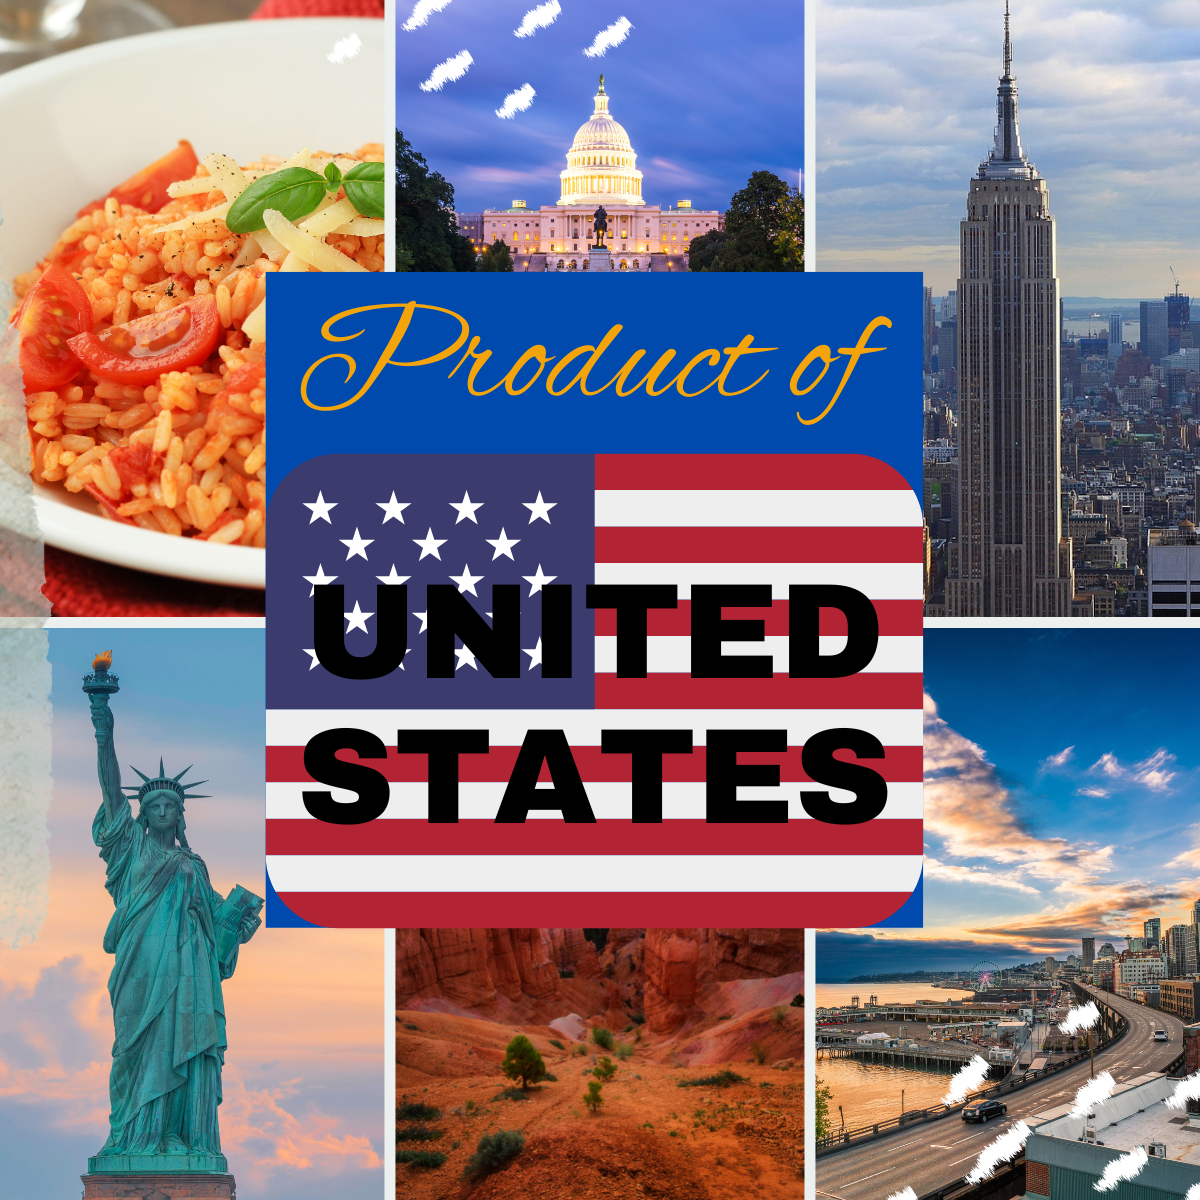 Products of the United States at Euro Fine Foods